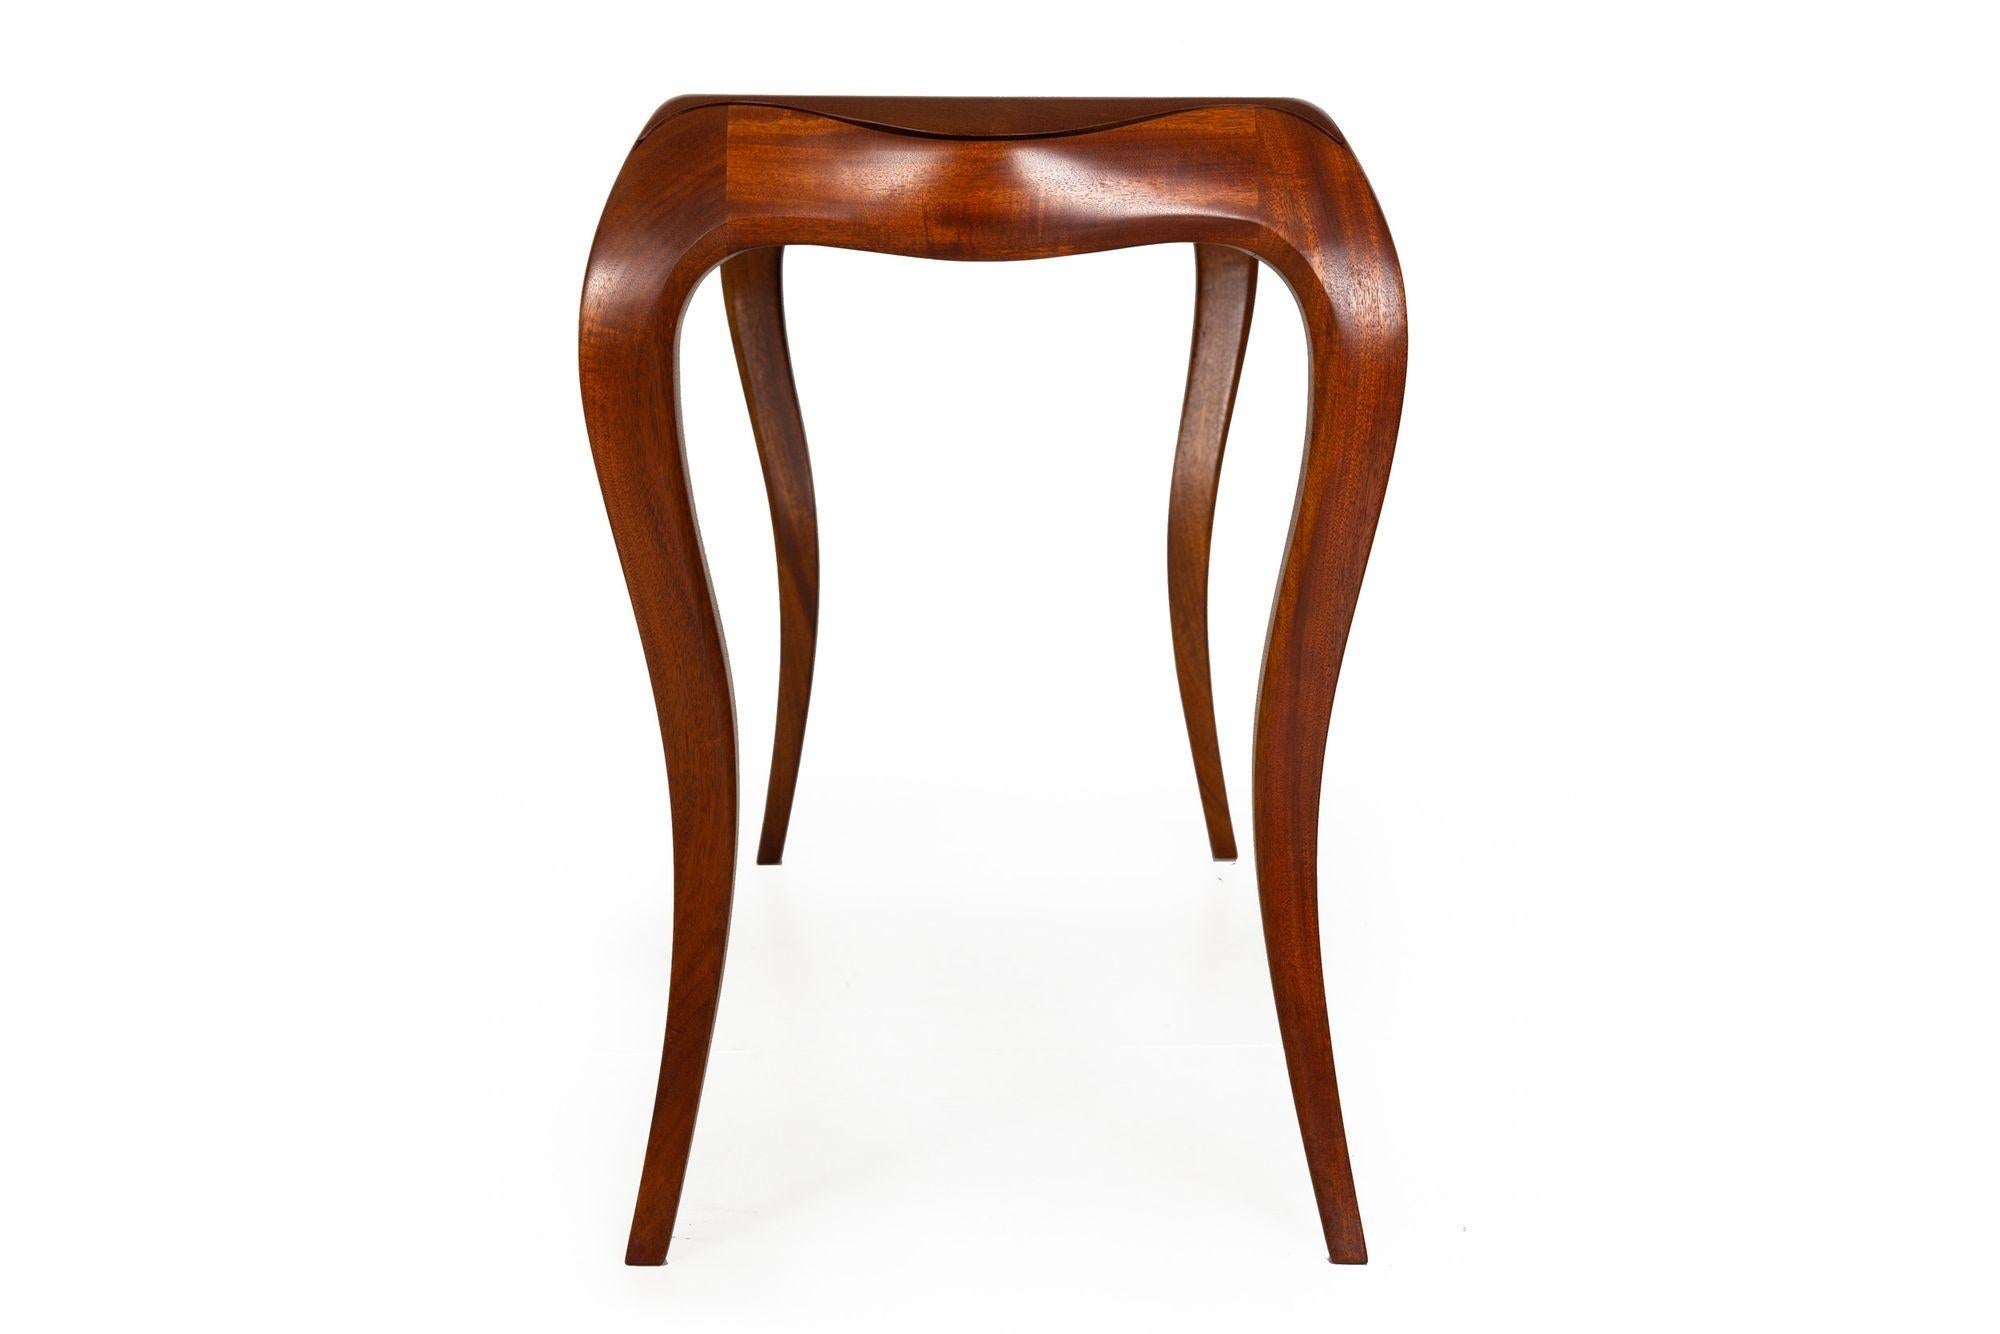 American Vintage Modernist Serpentine Mahogany Console Table, 20th Century, Signed For Sale